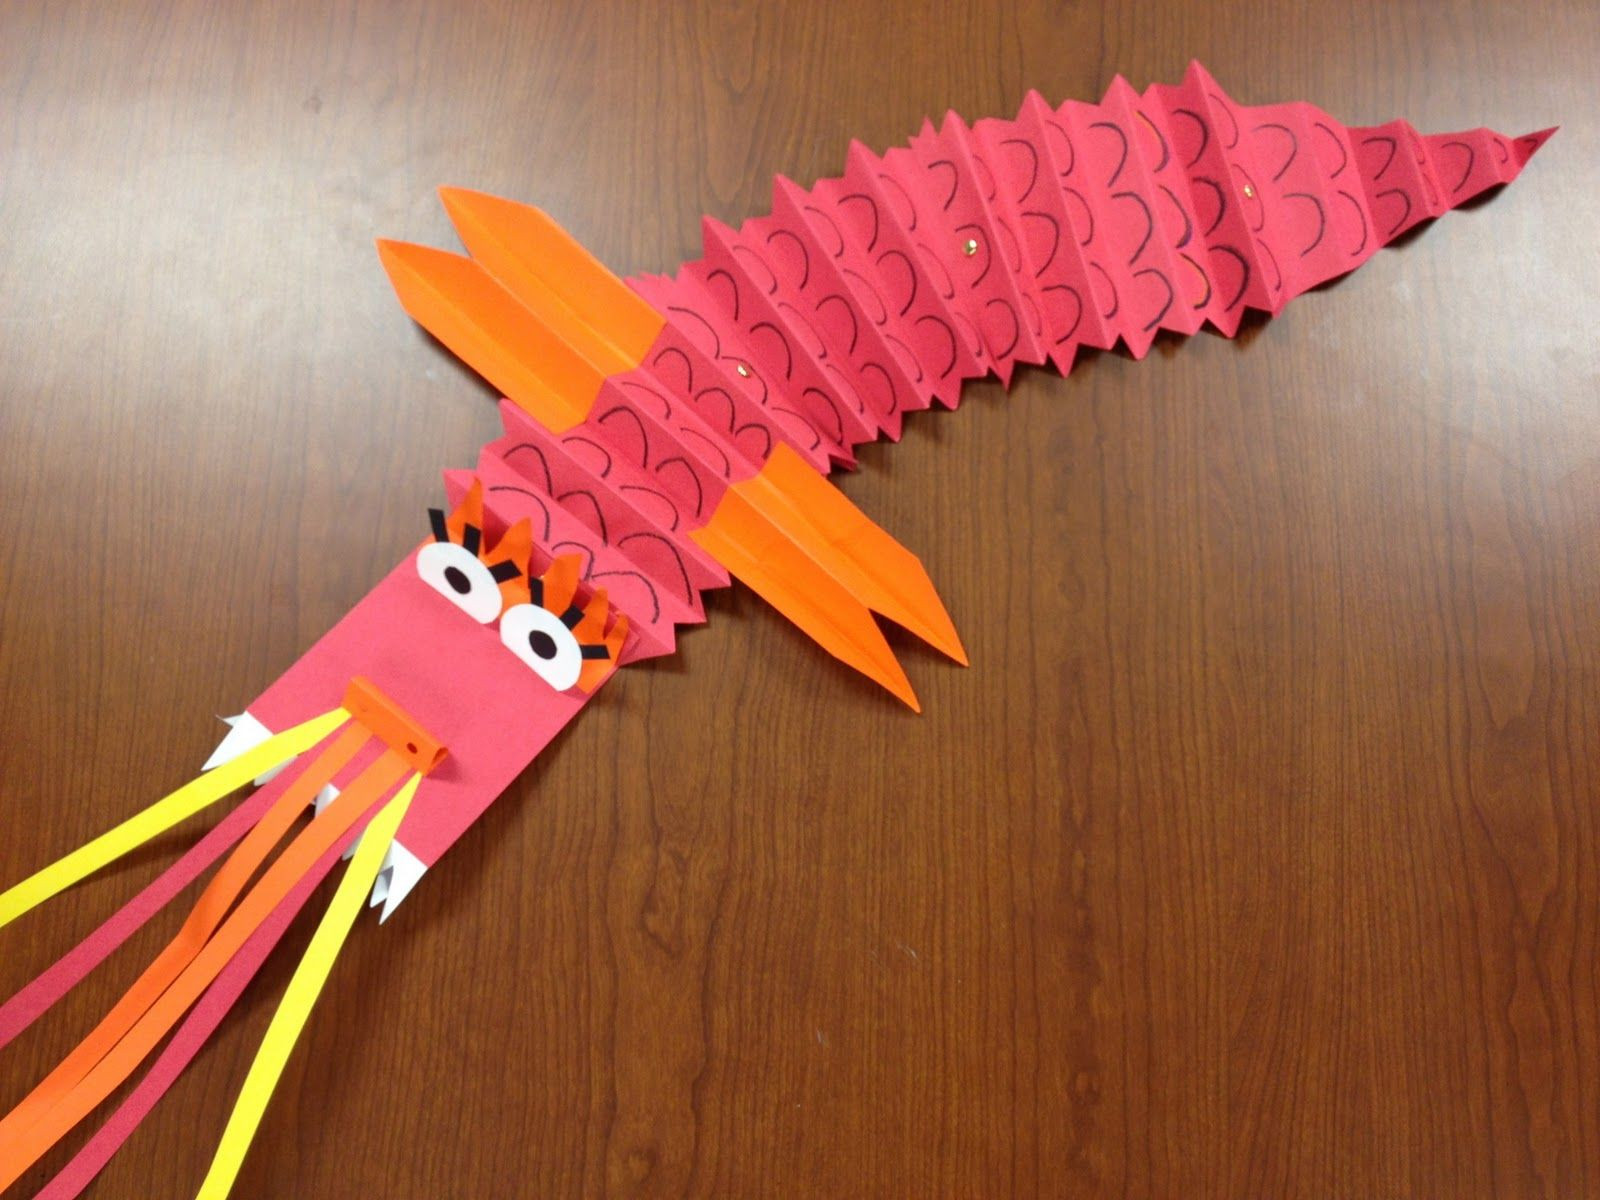 Dragon Craft For Kids
 Pin on Art project ideas